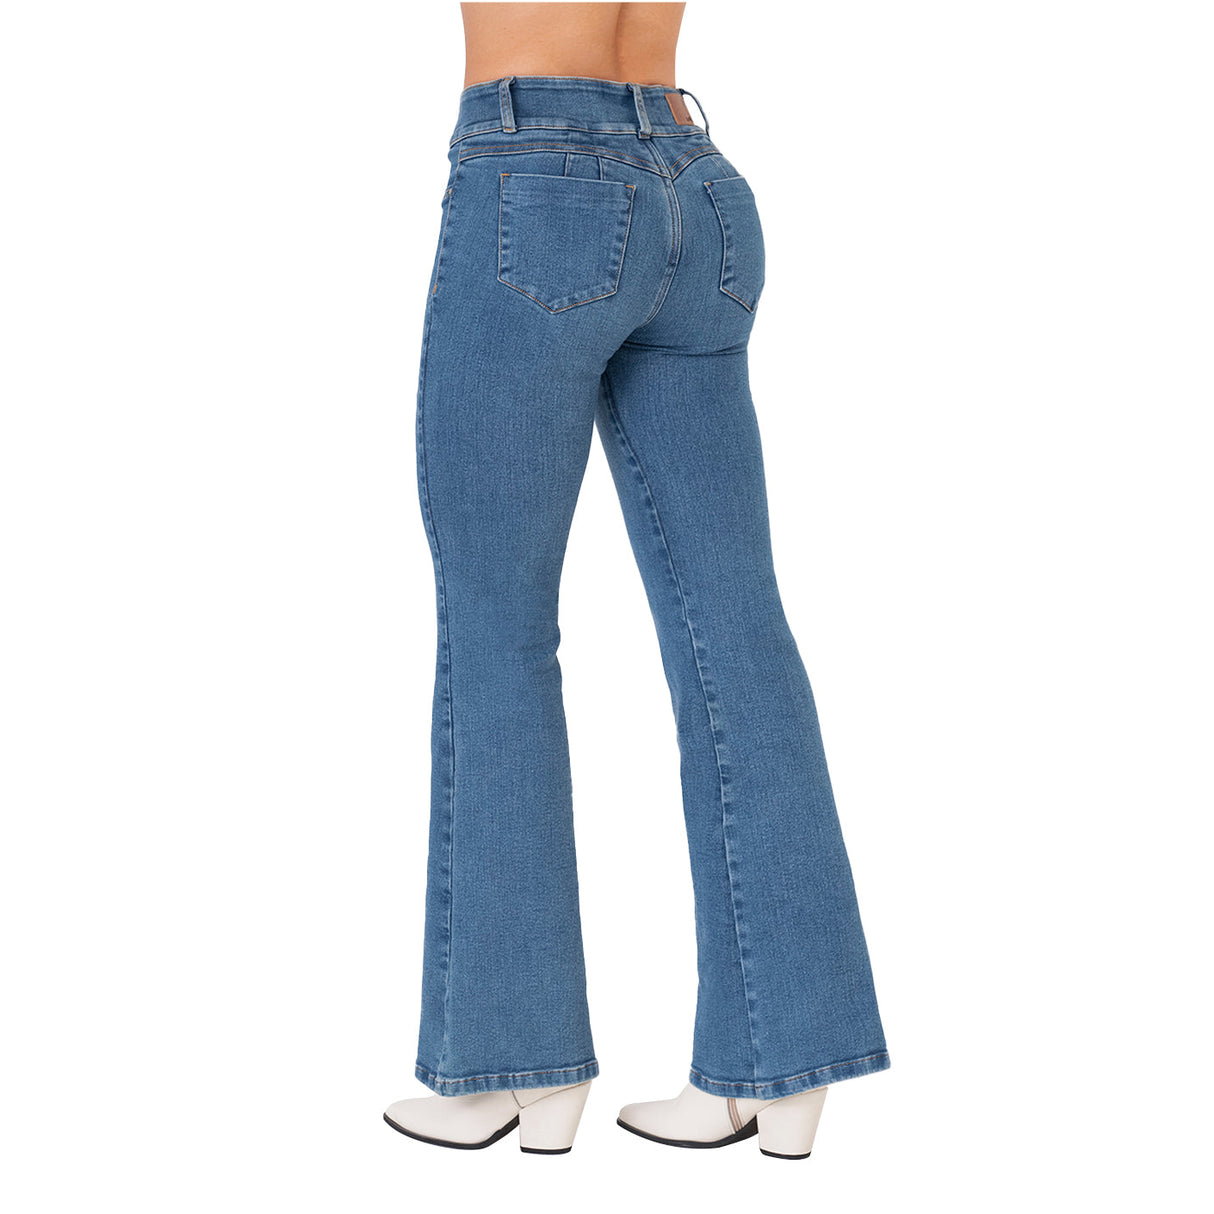 Colombian Butt Lifter Jeans with removable pads